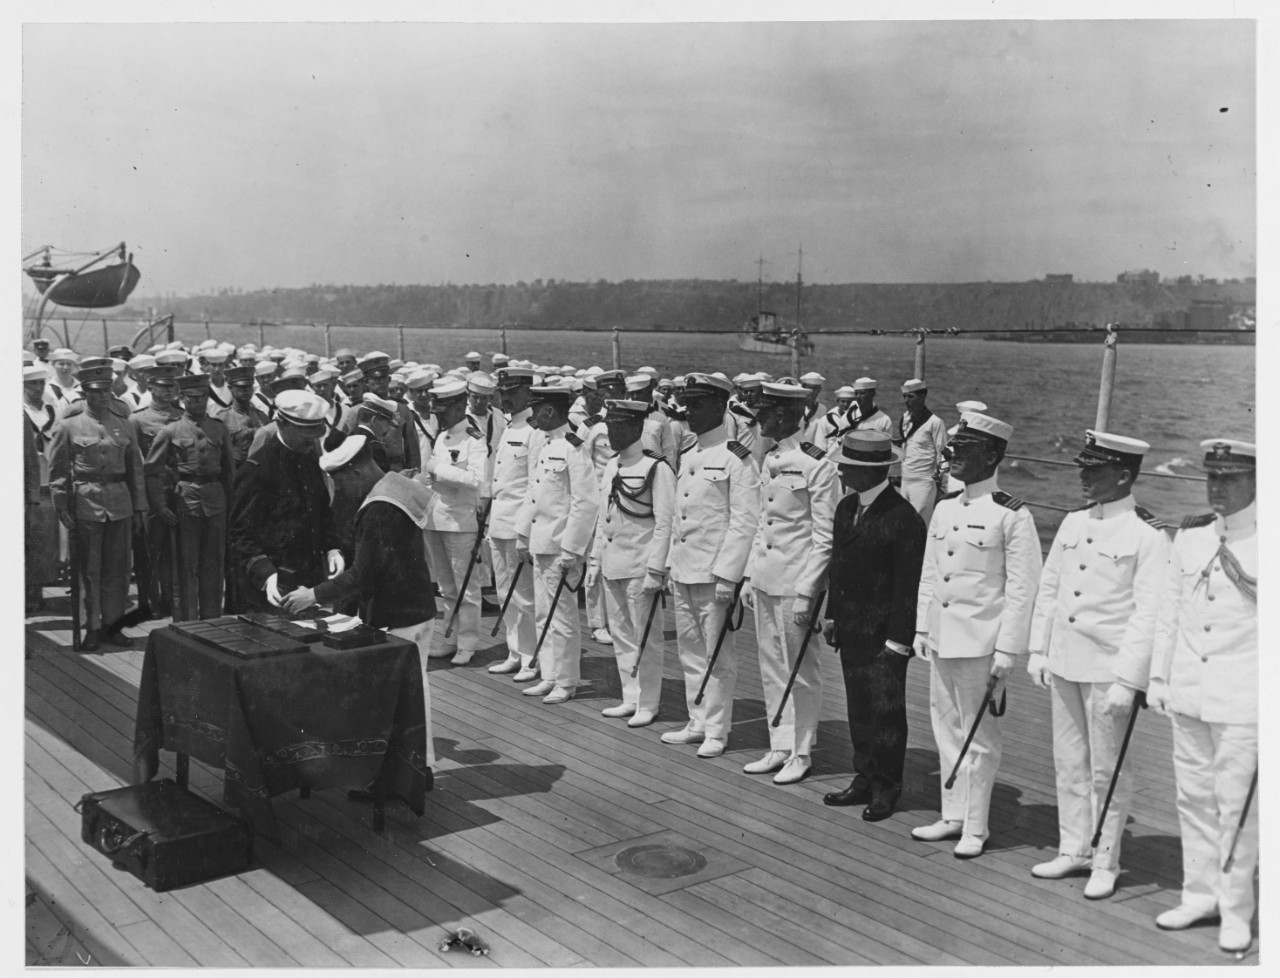 Admiral Mayo on the Deck of the USS PENNSYLVANIA